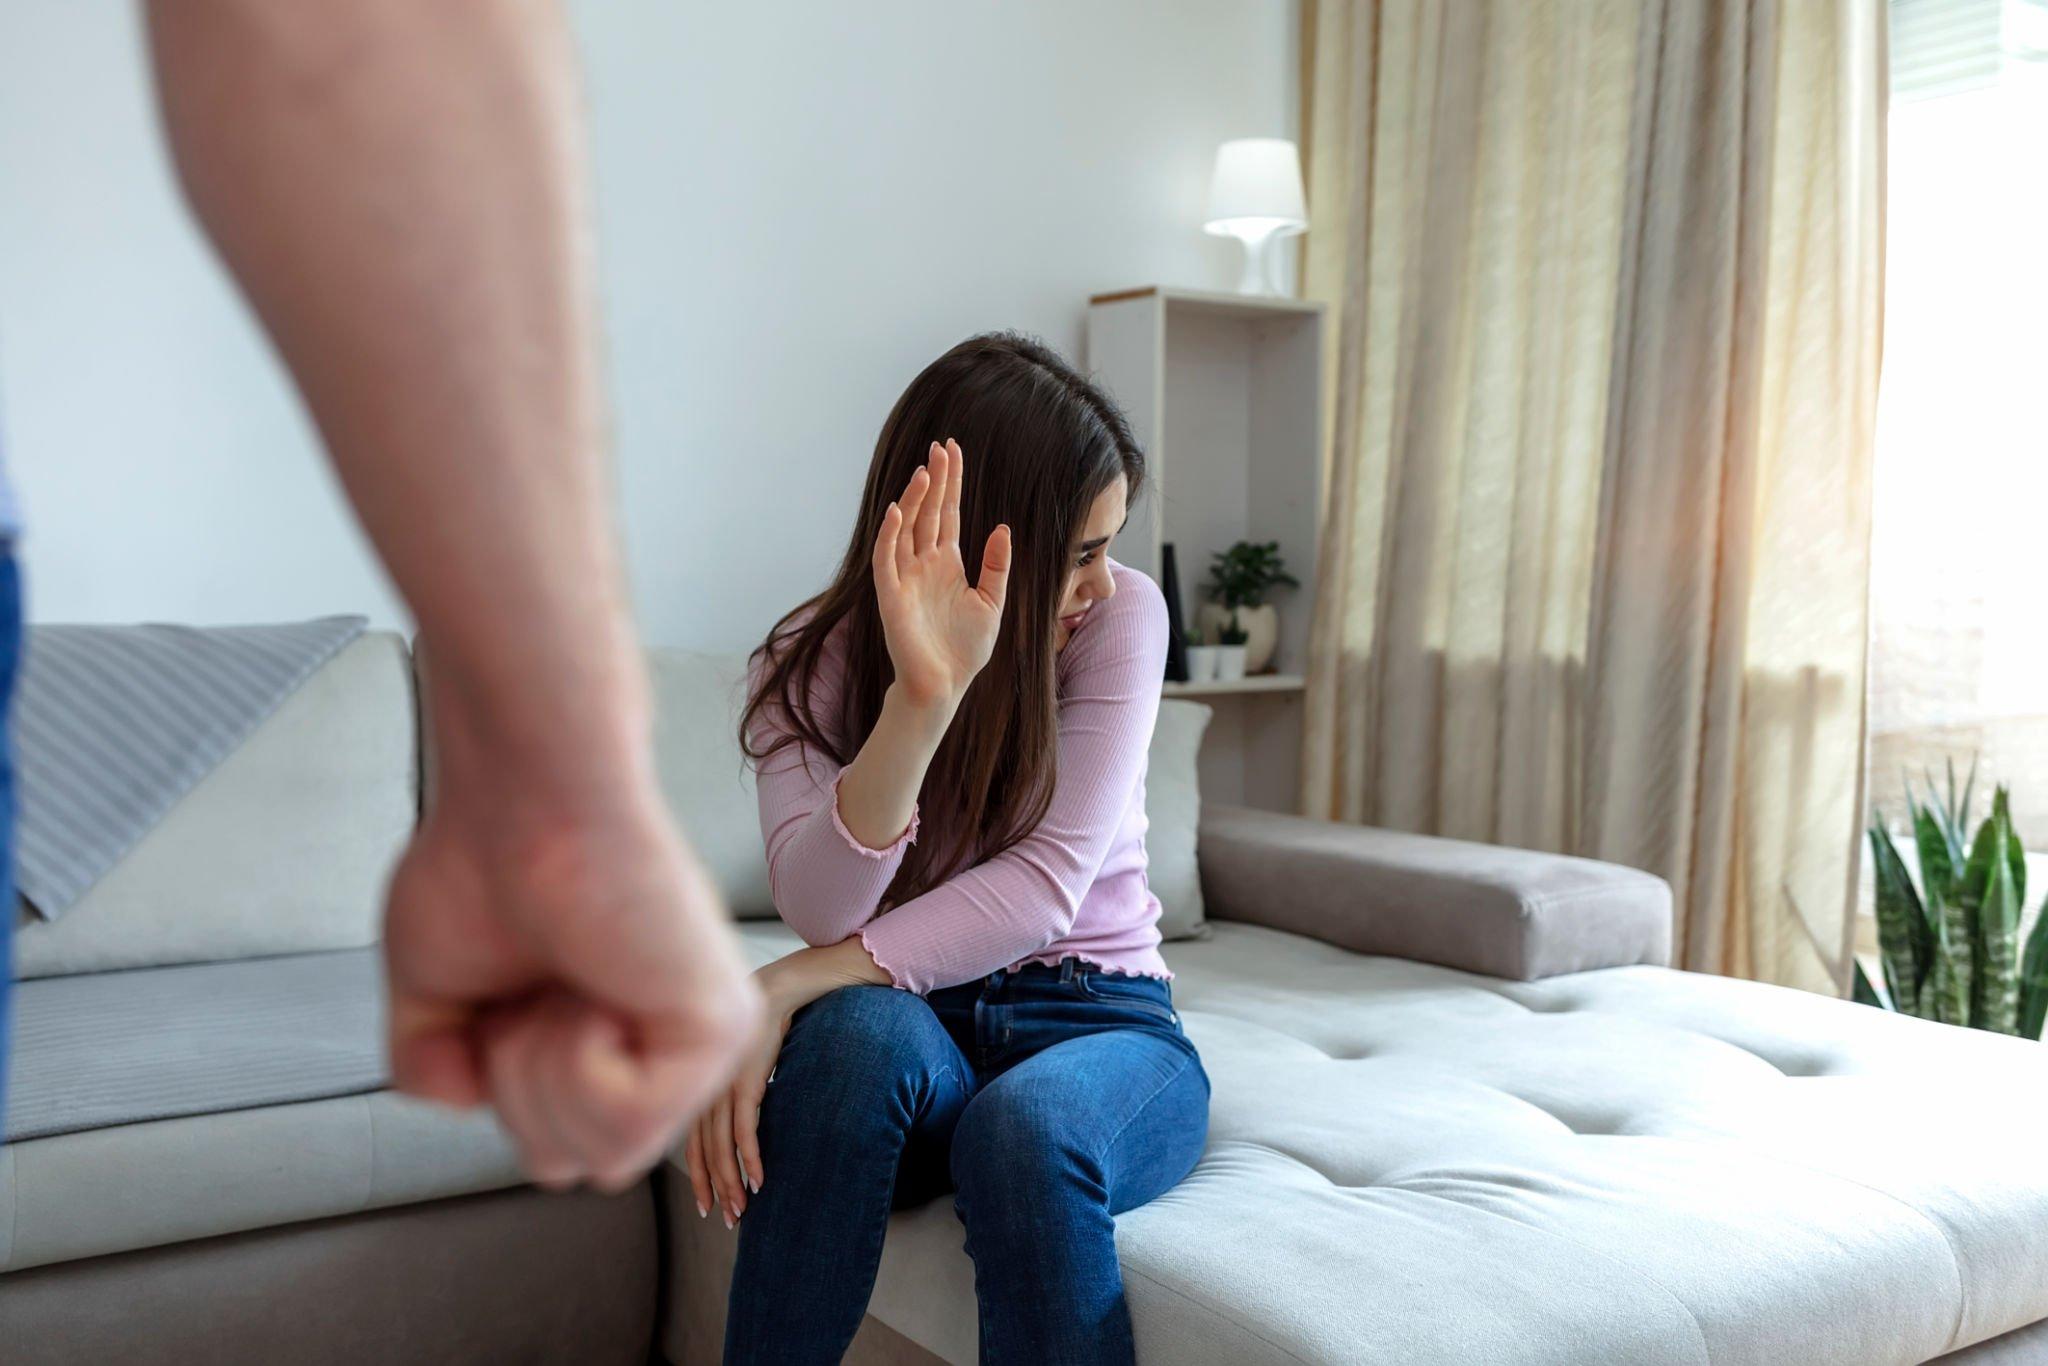 Different Types of Domestic Violence That You Must Know